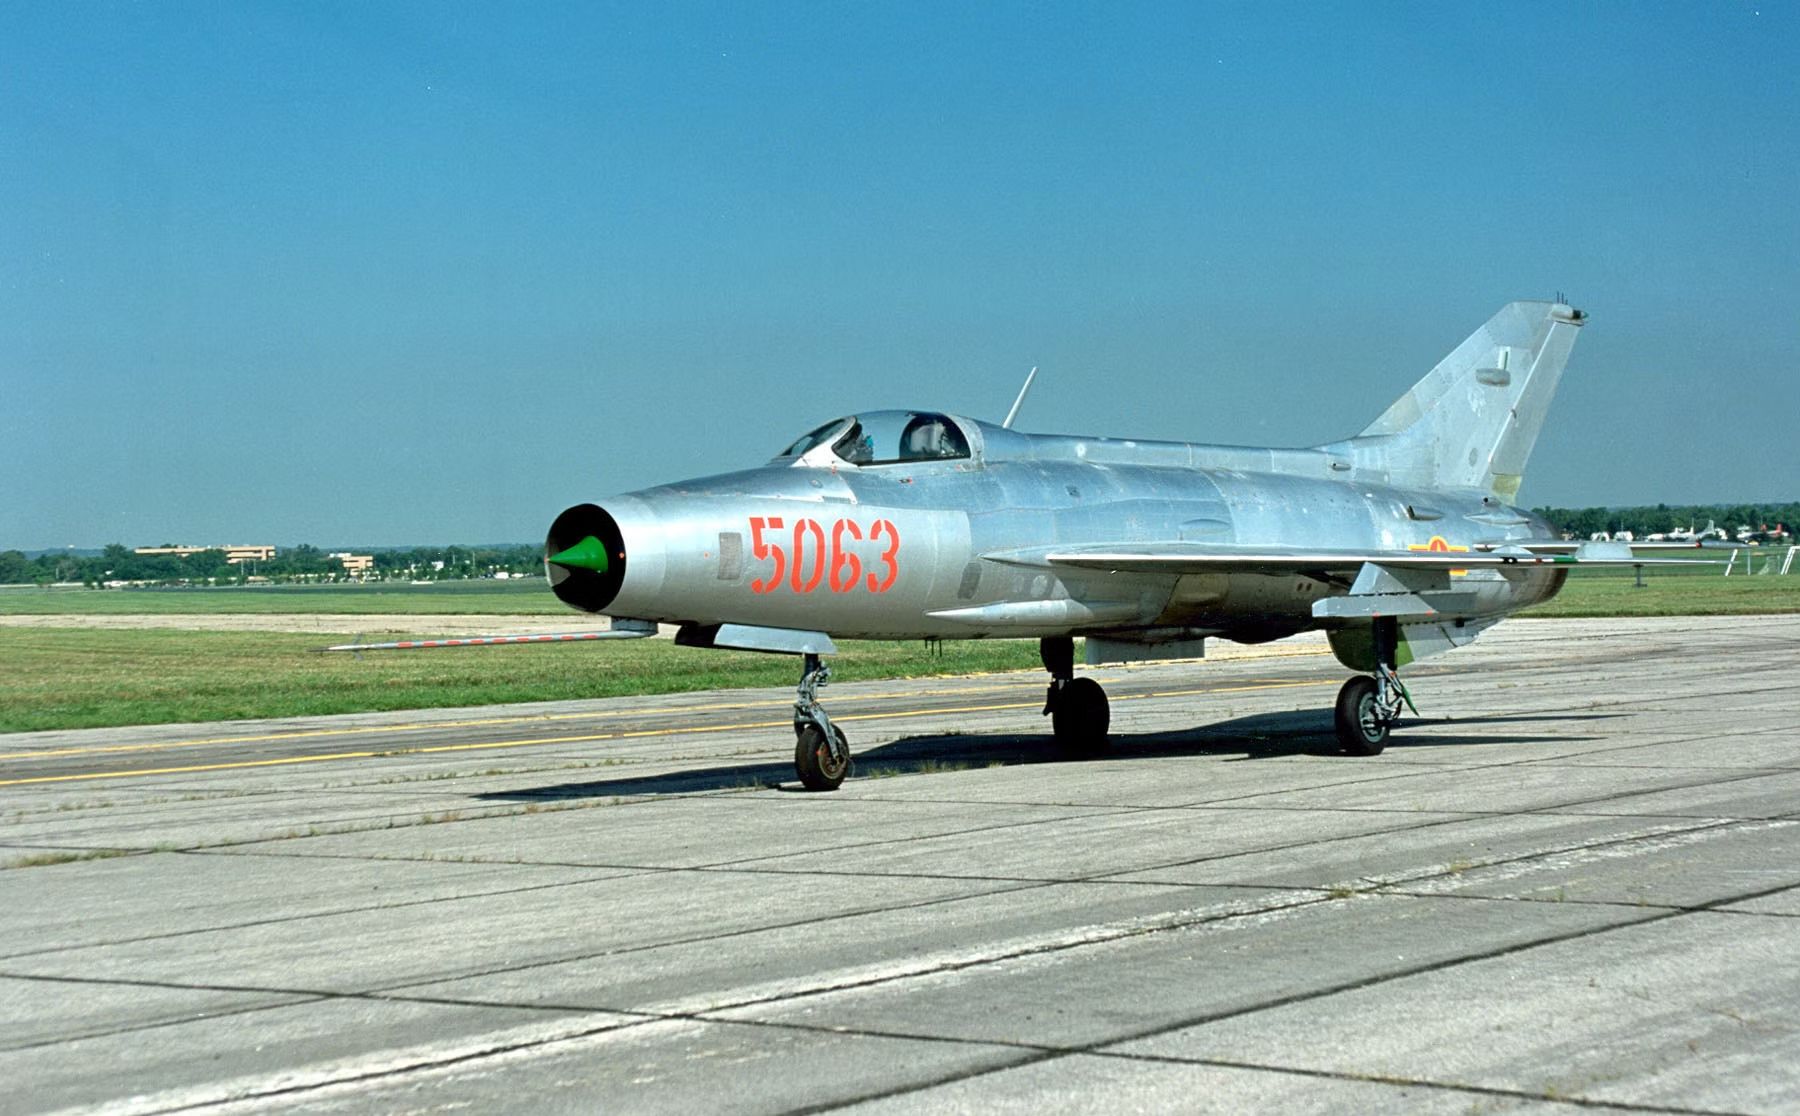 A MiG-21 on an airport apron.